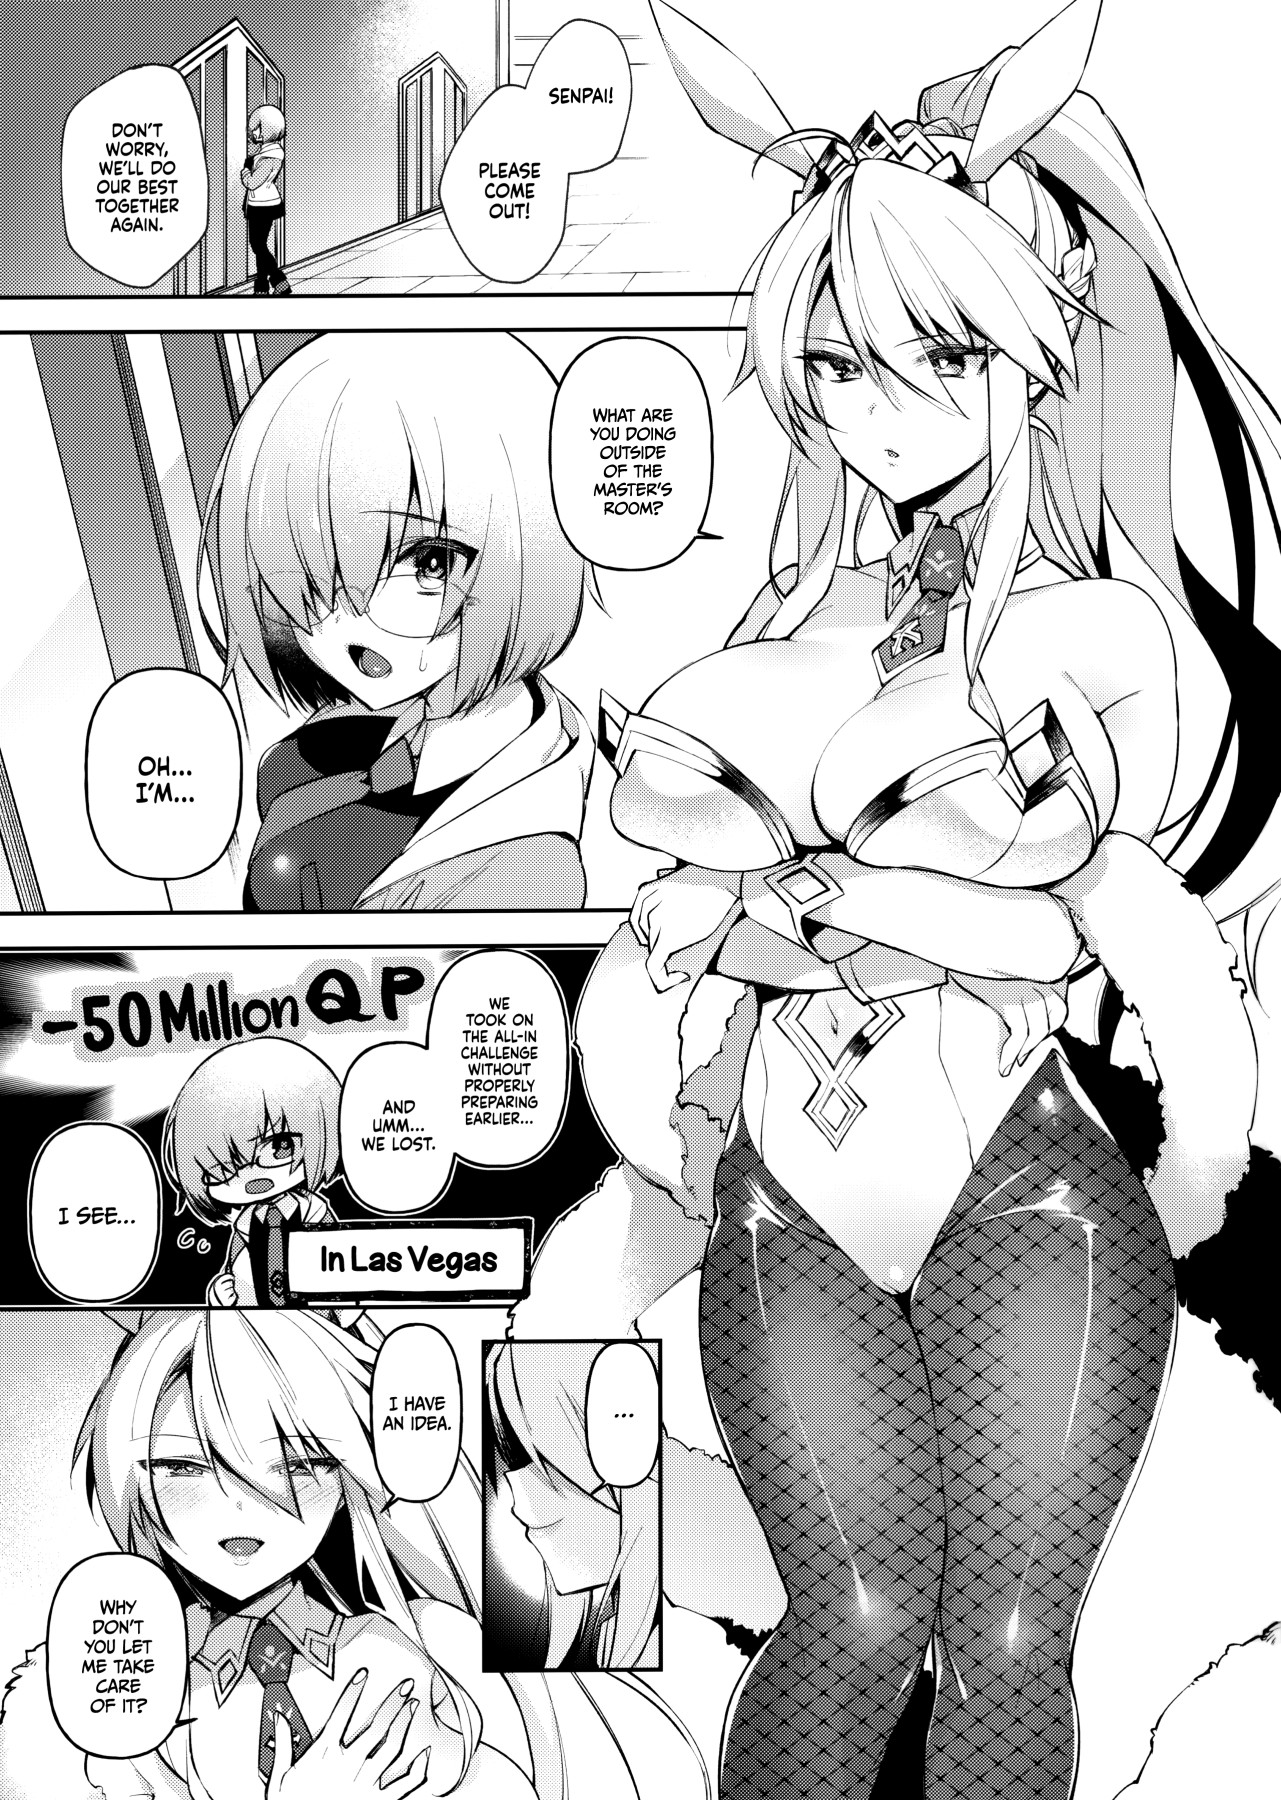 Hentai Manga Comic-If You Don't Have Any QP, Just Shoot Out Your Cum!-Read-2